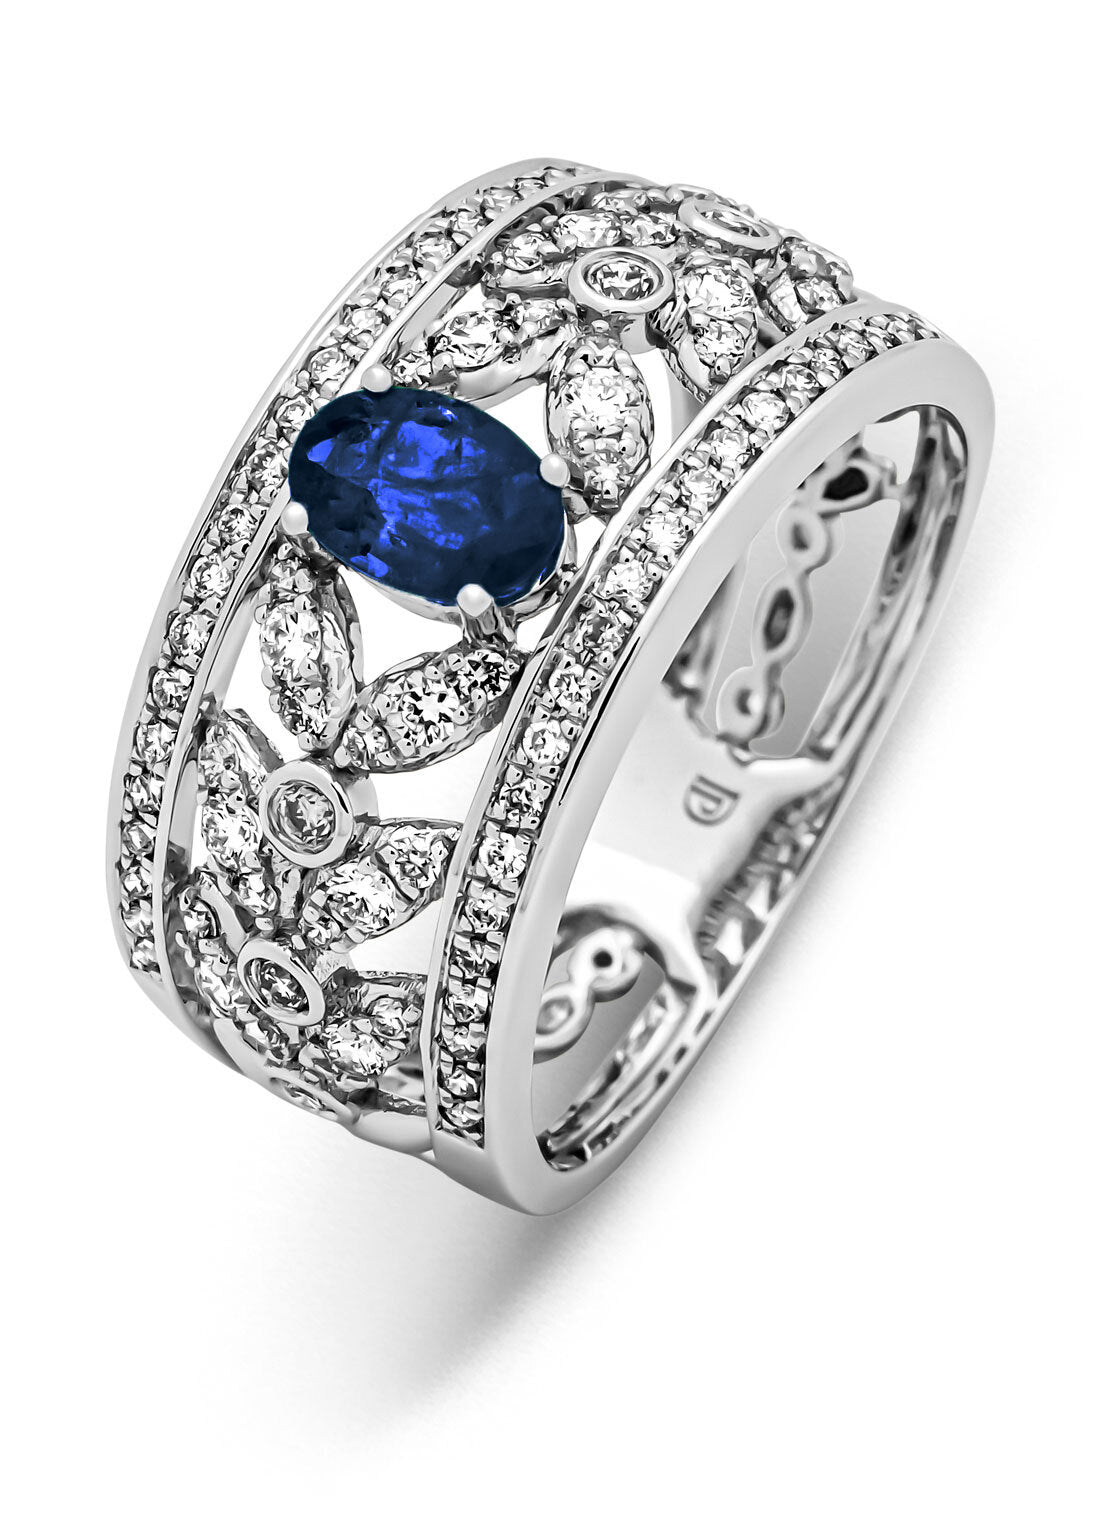 White gold ring, 0.61 CT Blue Sapphire, Majestic